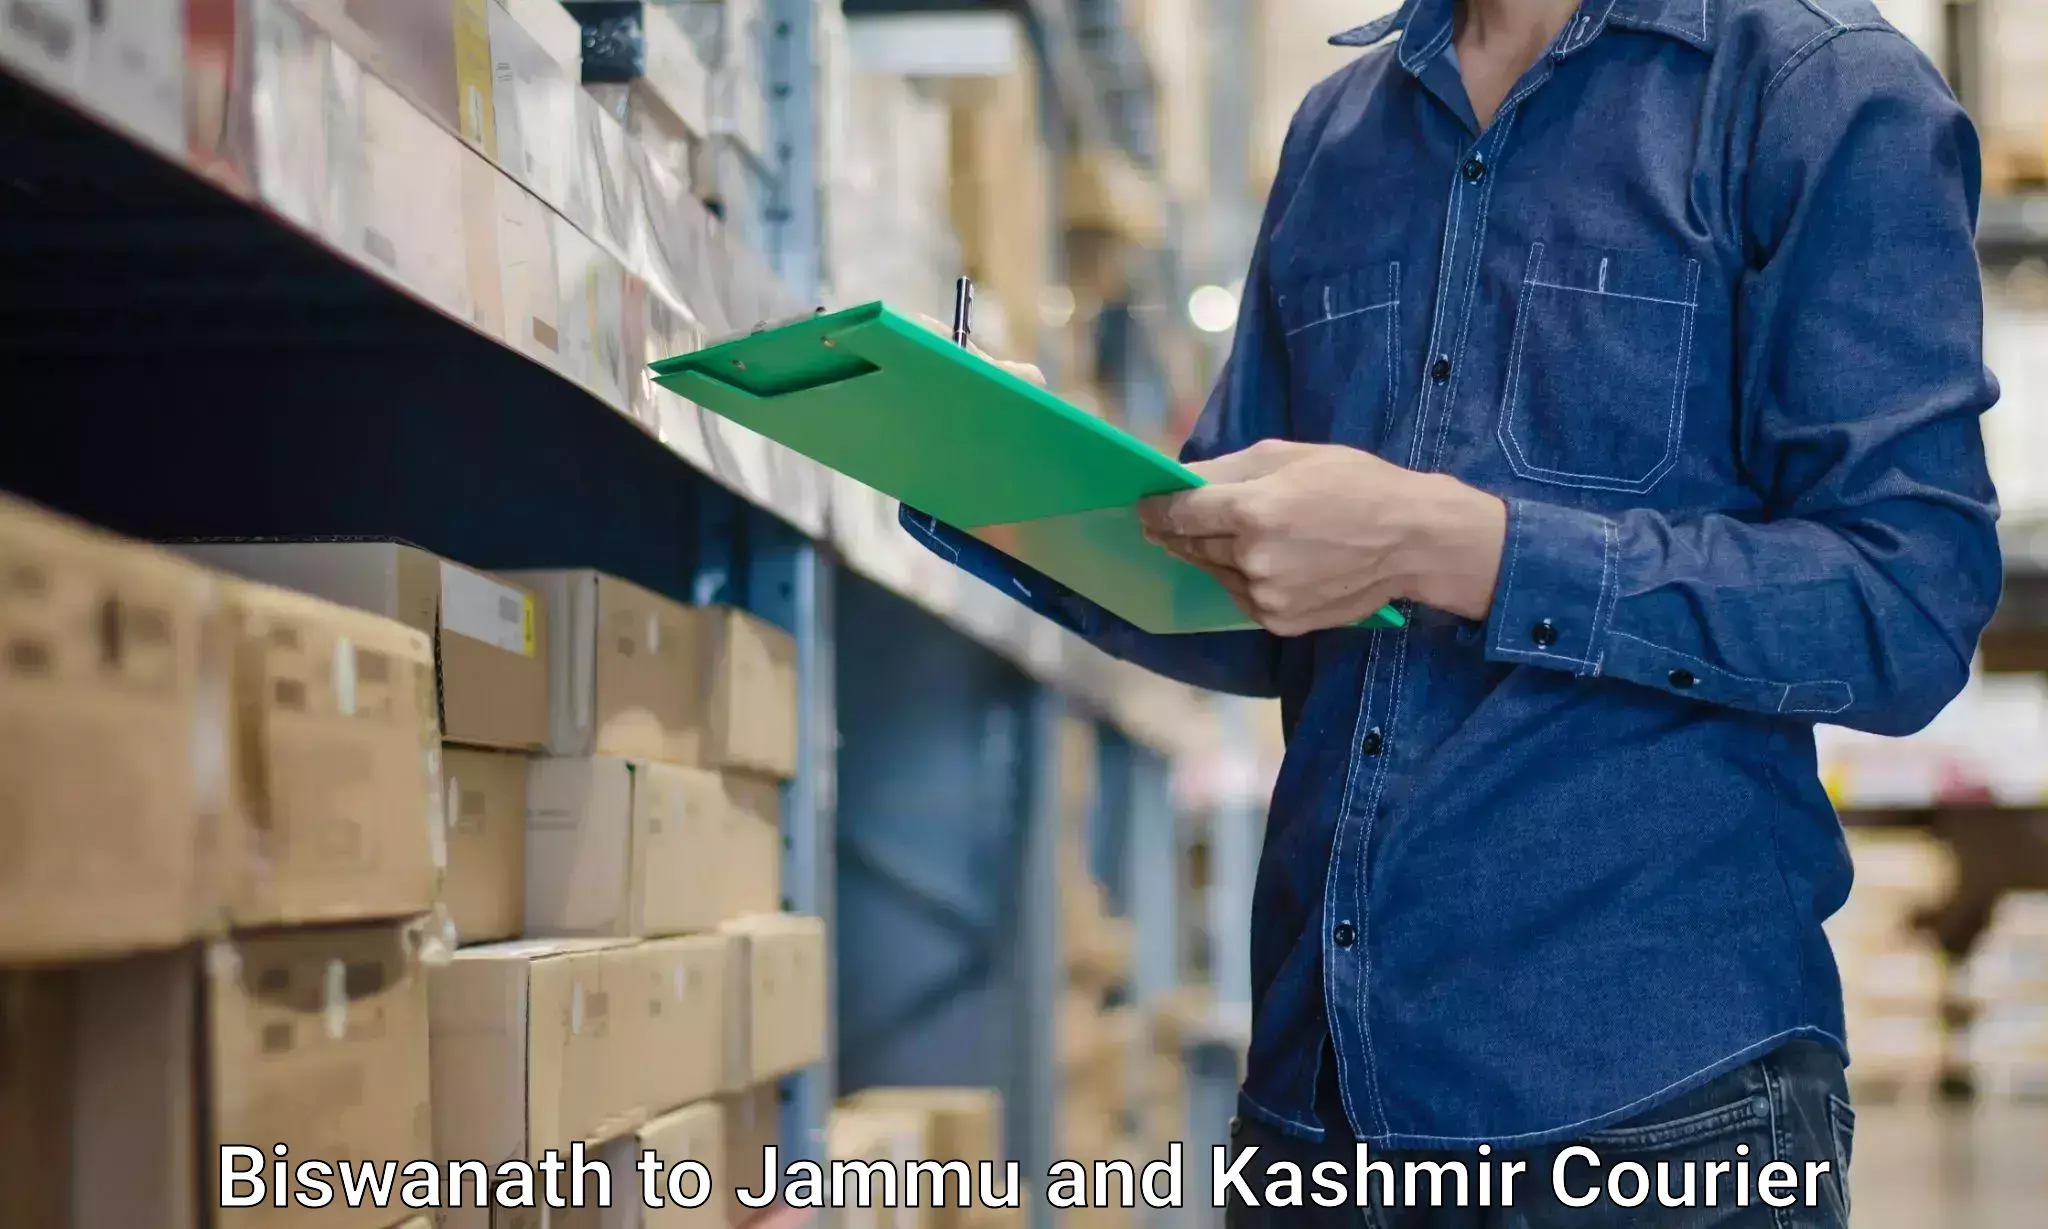 Furniture moving service in Biswanath to Jammu and Kashmir